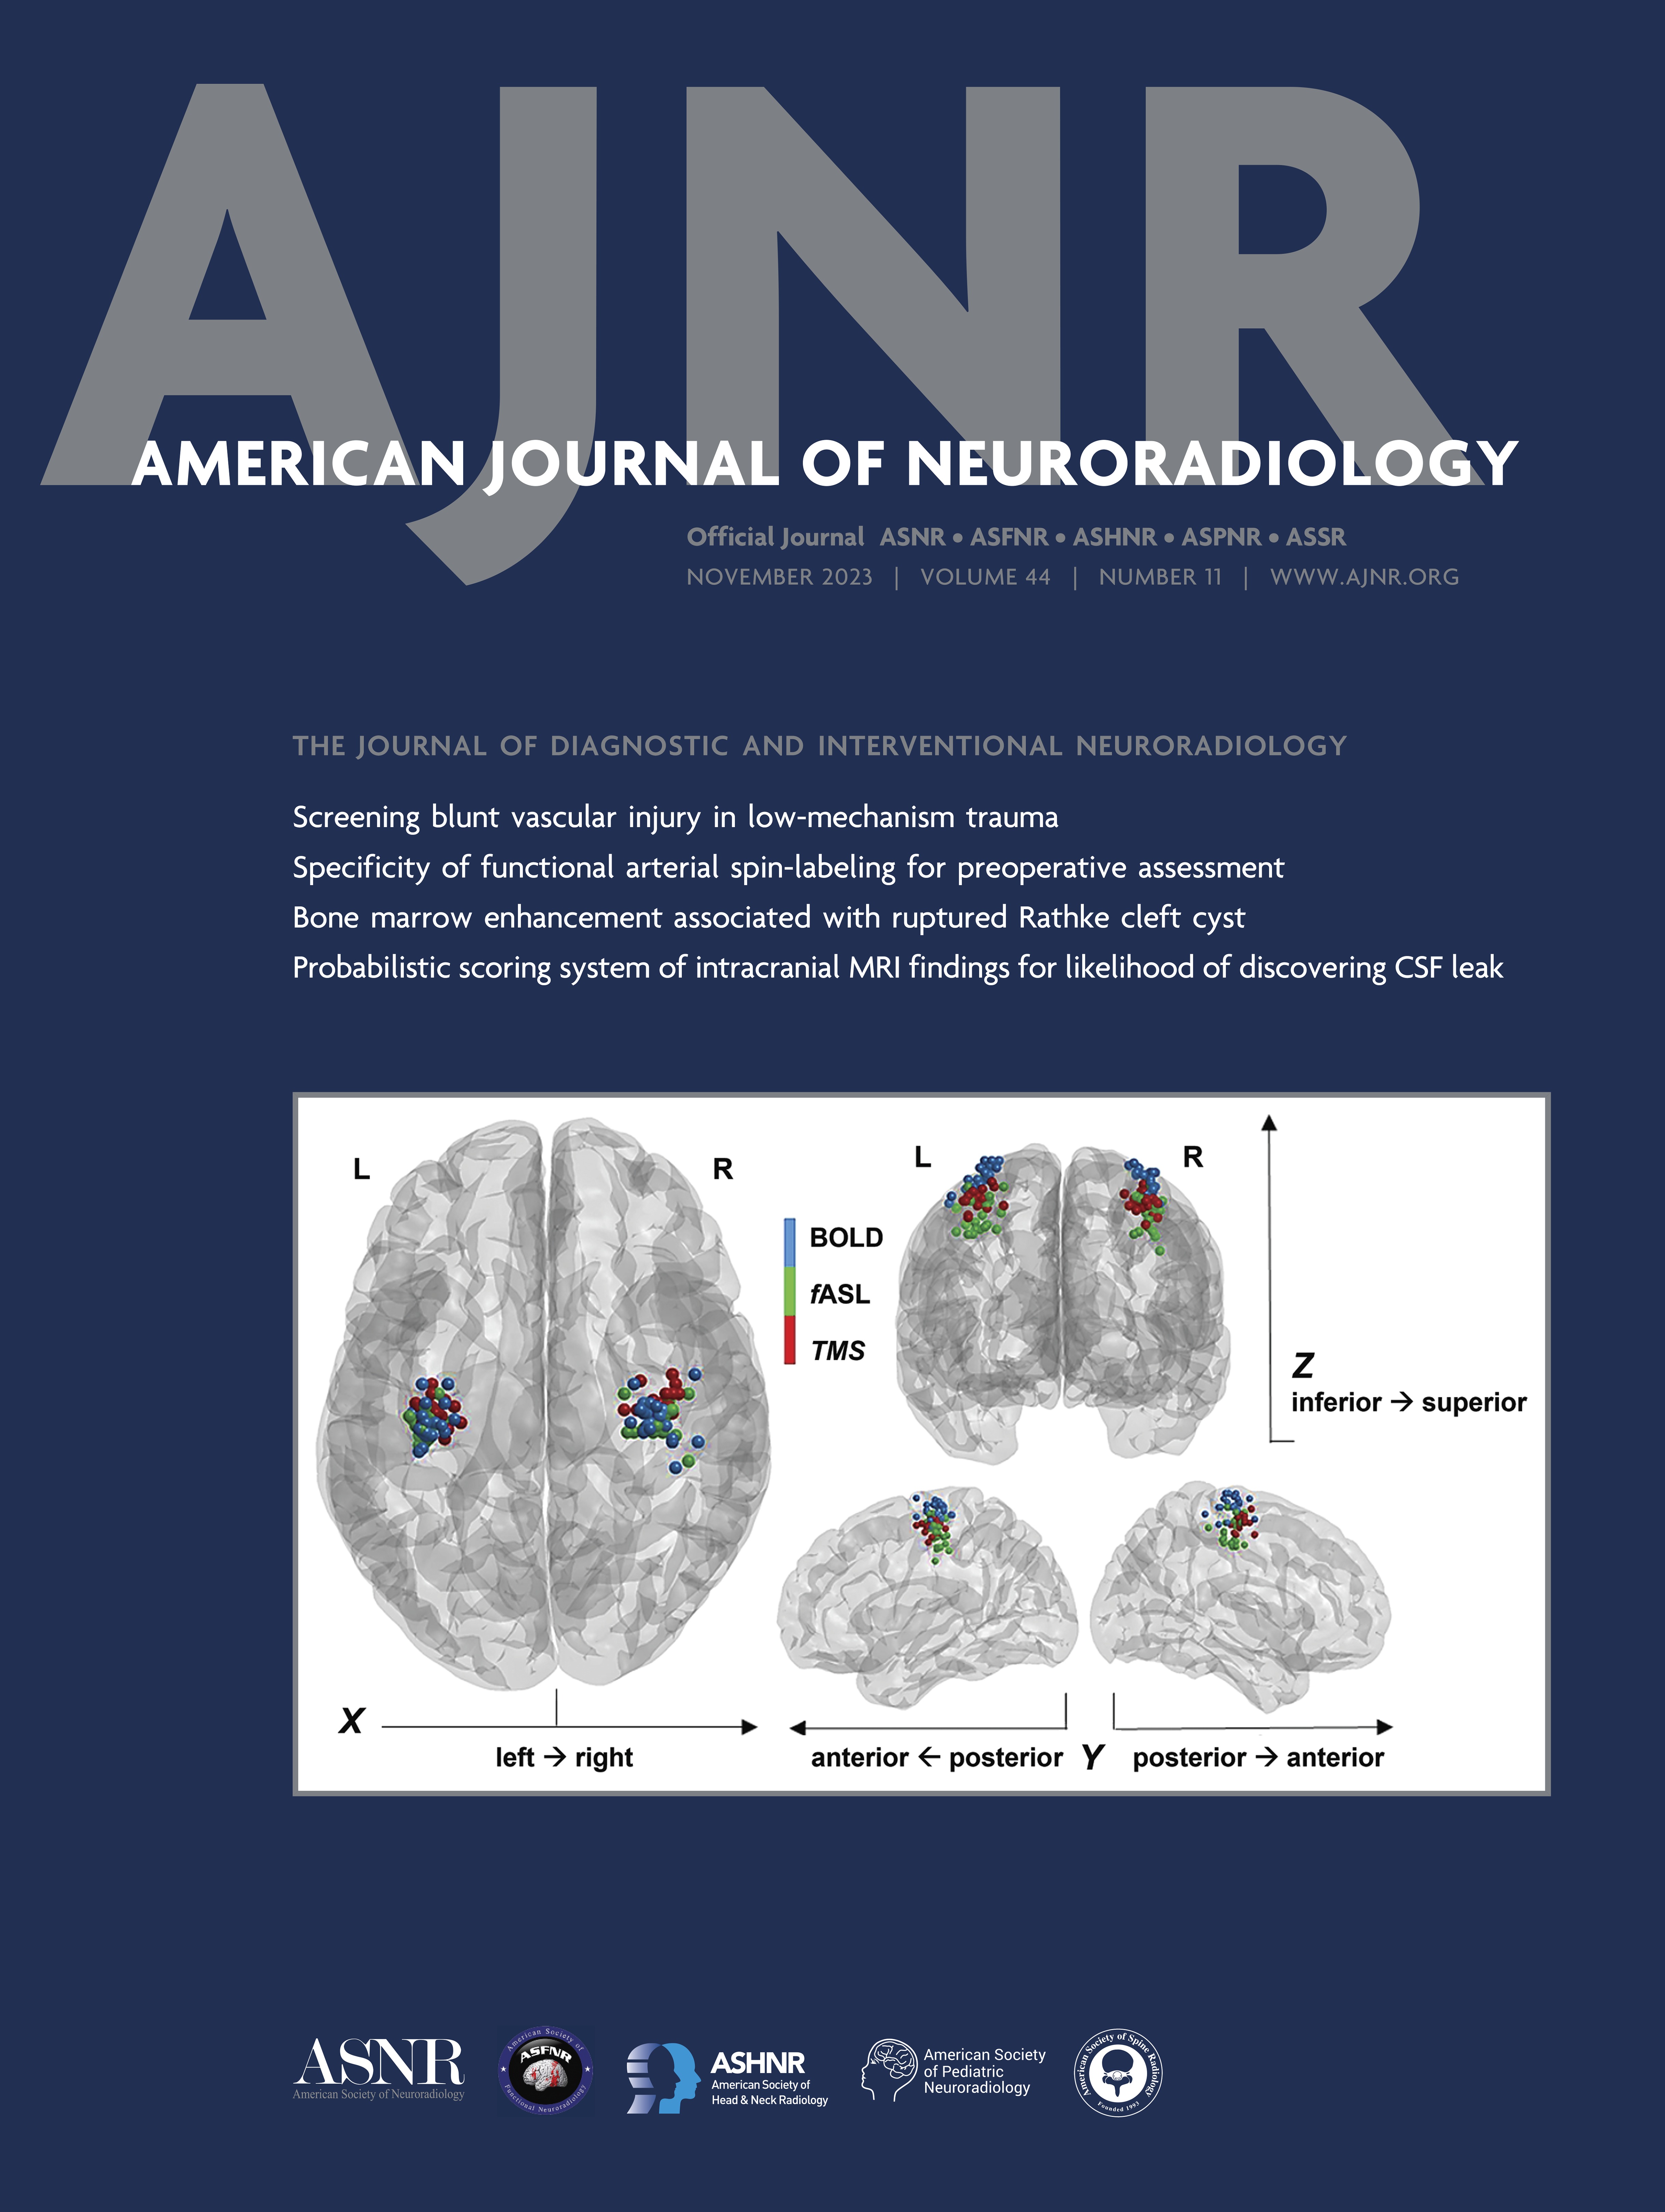 Perfusion Collateral Index versus Hypoperfusion Intensity Ratio in Assessment of Collaterals in Patients with Acute Ischemic Stroke [NEUROVASCULAR/STROKE IMAGING]